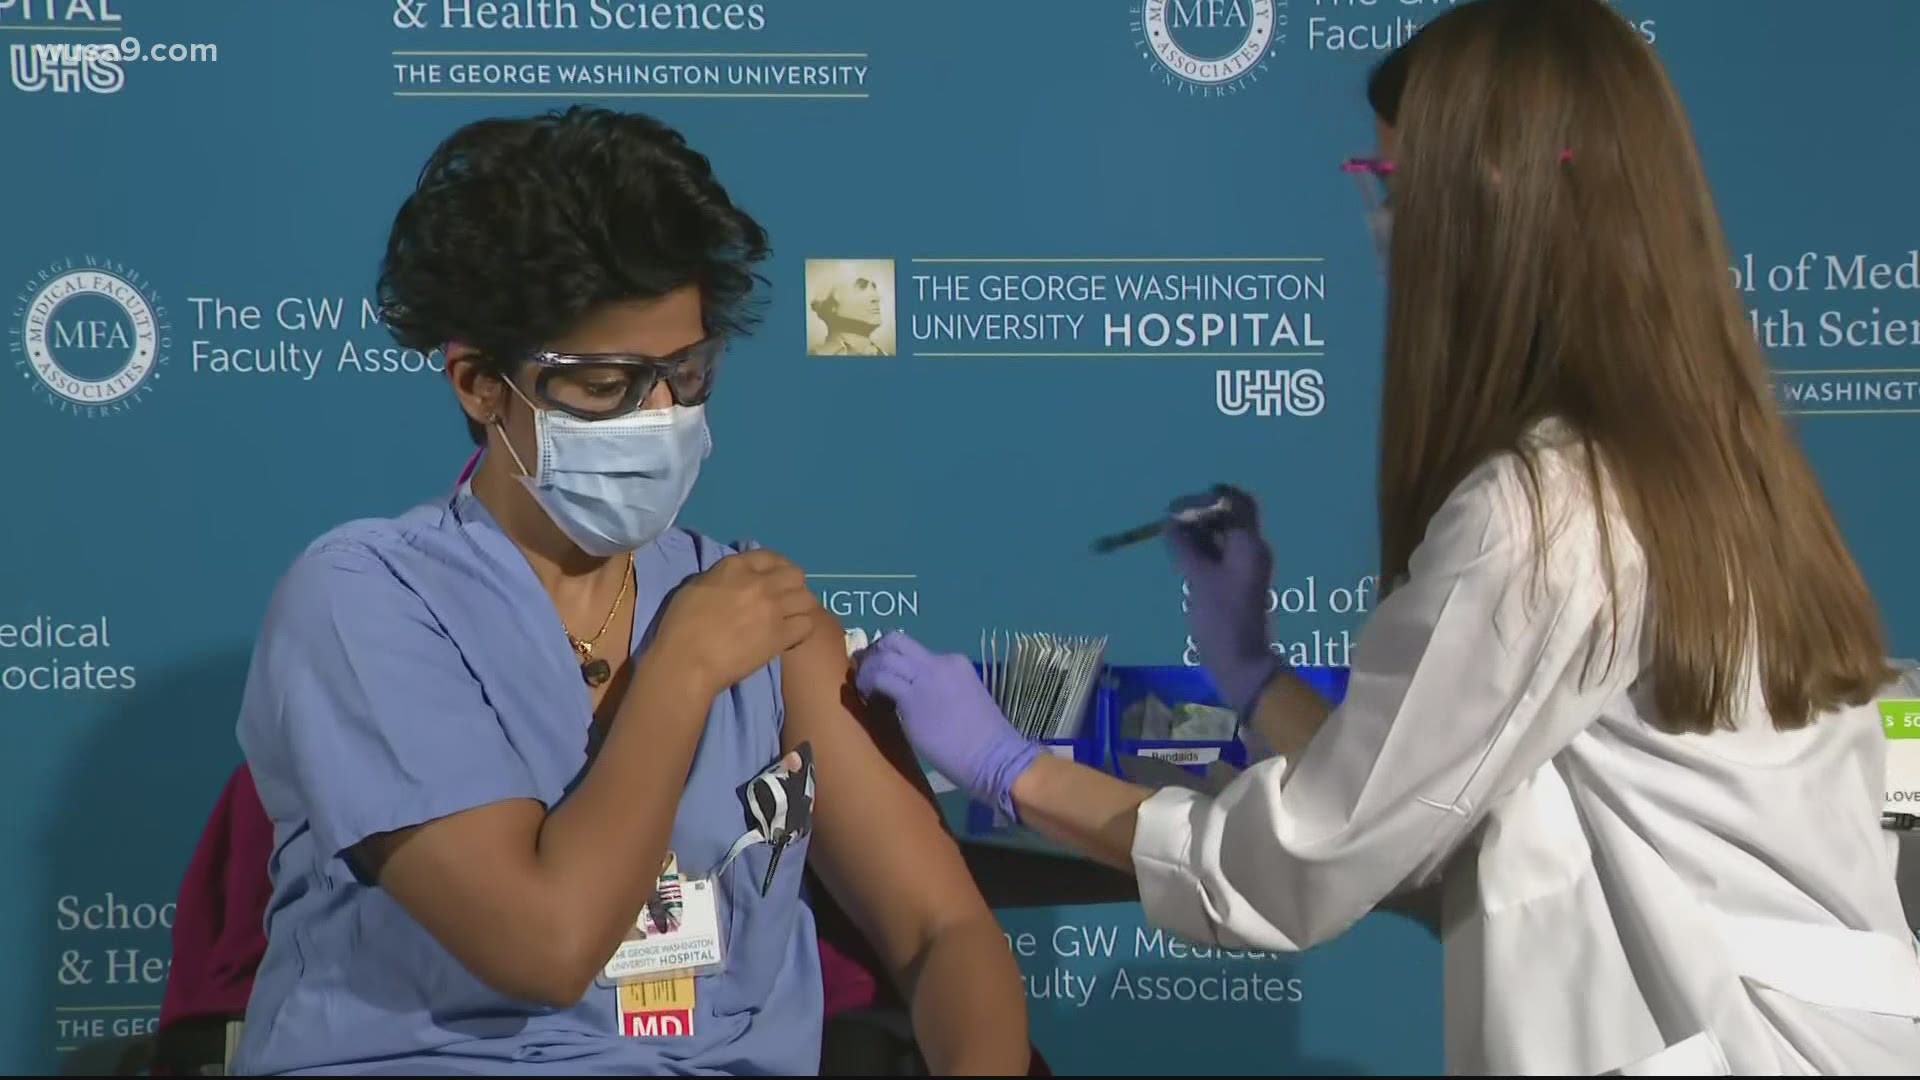 On Sunday, medical crews and hospitals in DC continued to plan for administering the COVID-19 vaccine possibly as soon as this week.